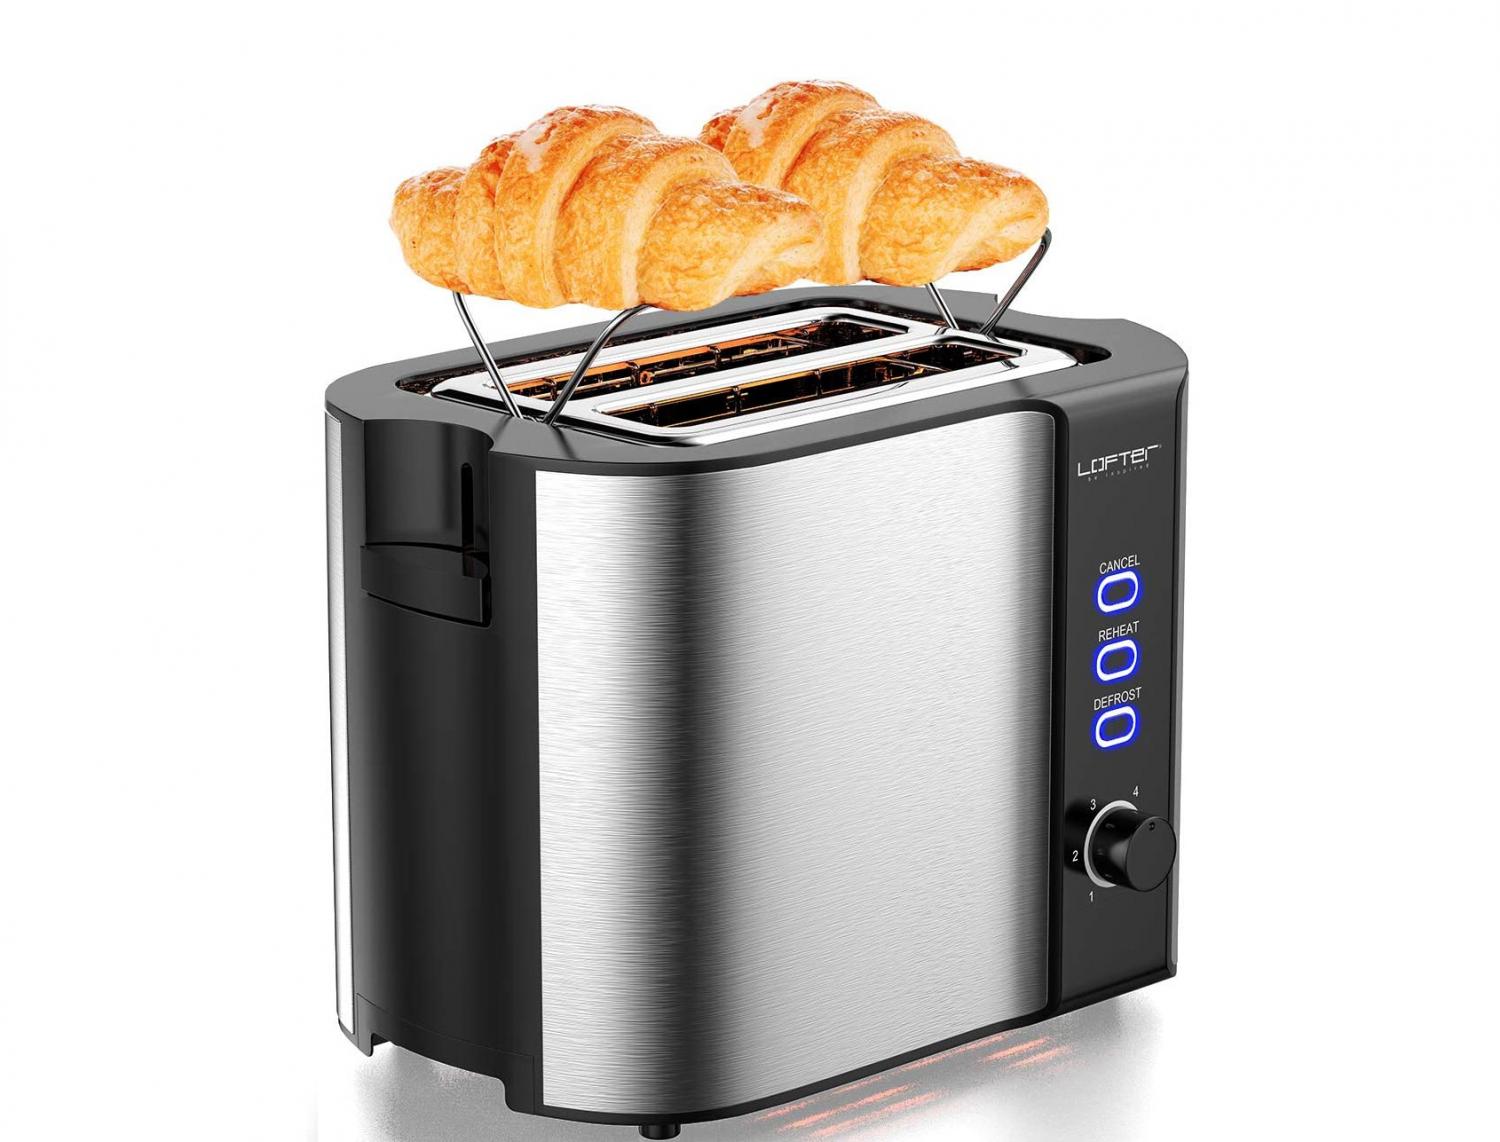 Toaster With Warming Rack - Pastry warming toaster